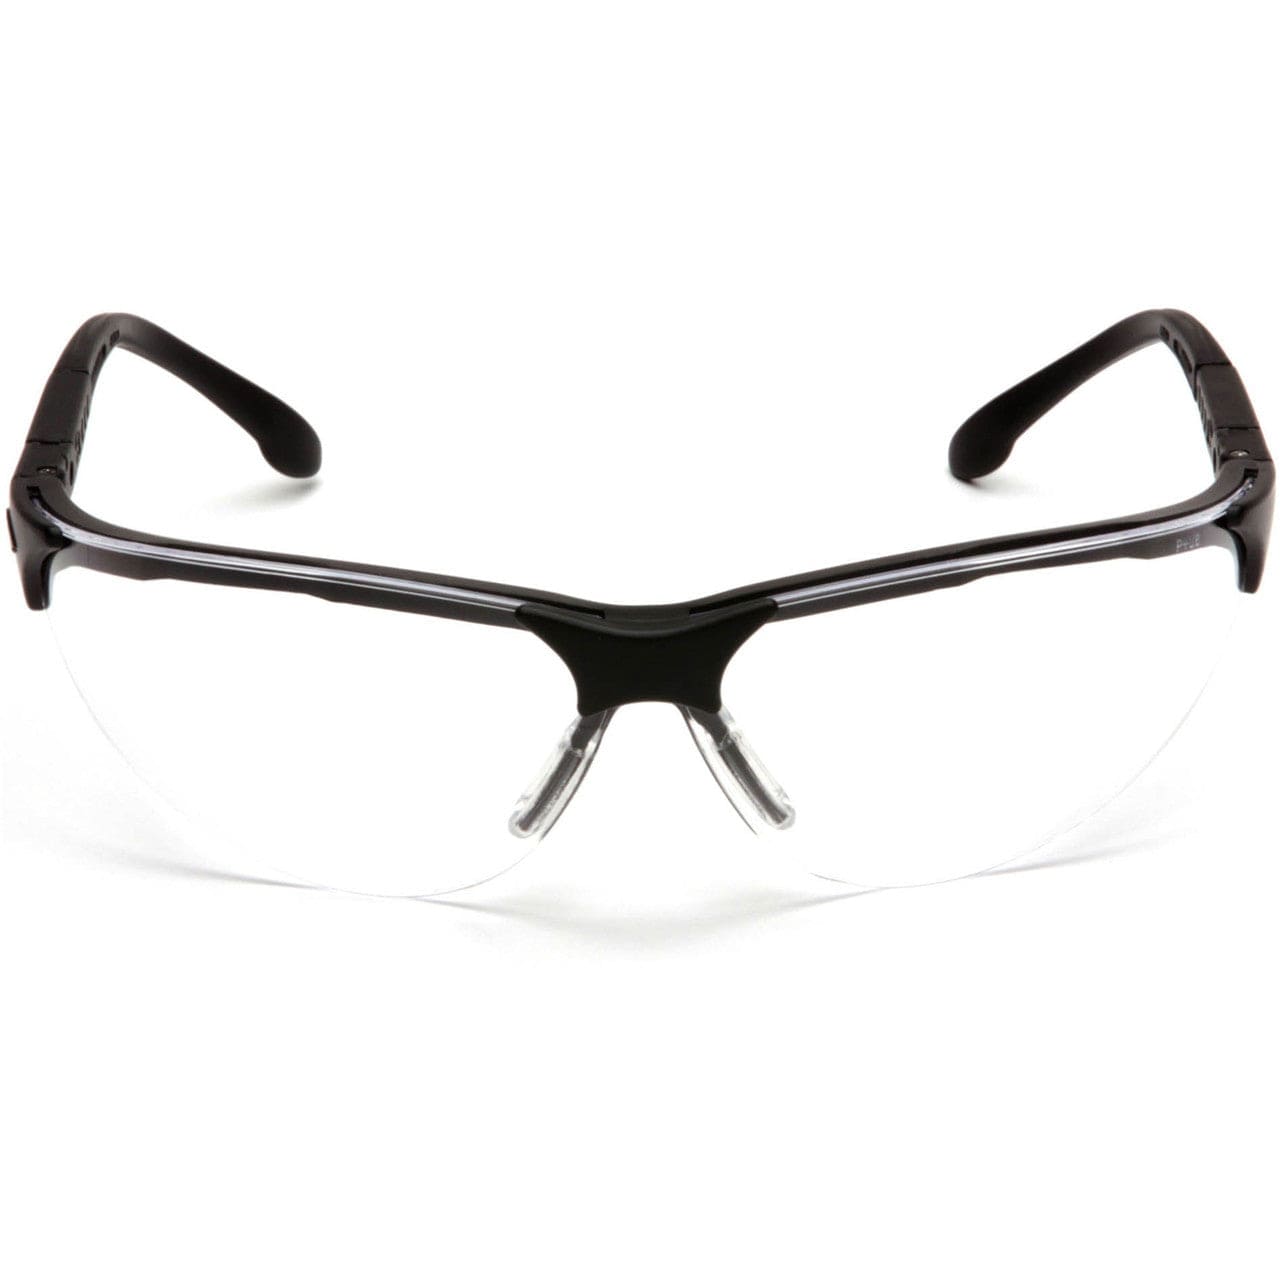 Pyramex Rendezvous Safety Glasses Black Frame Clear Lens SB2810S Front